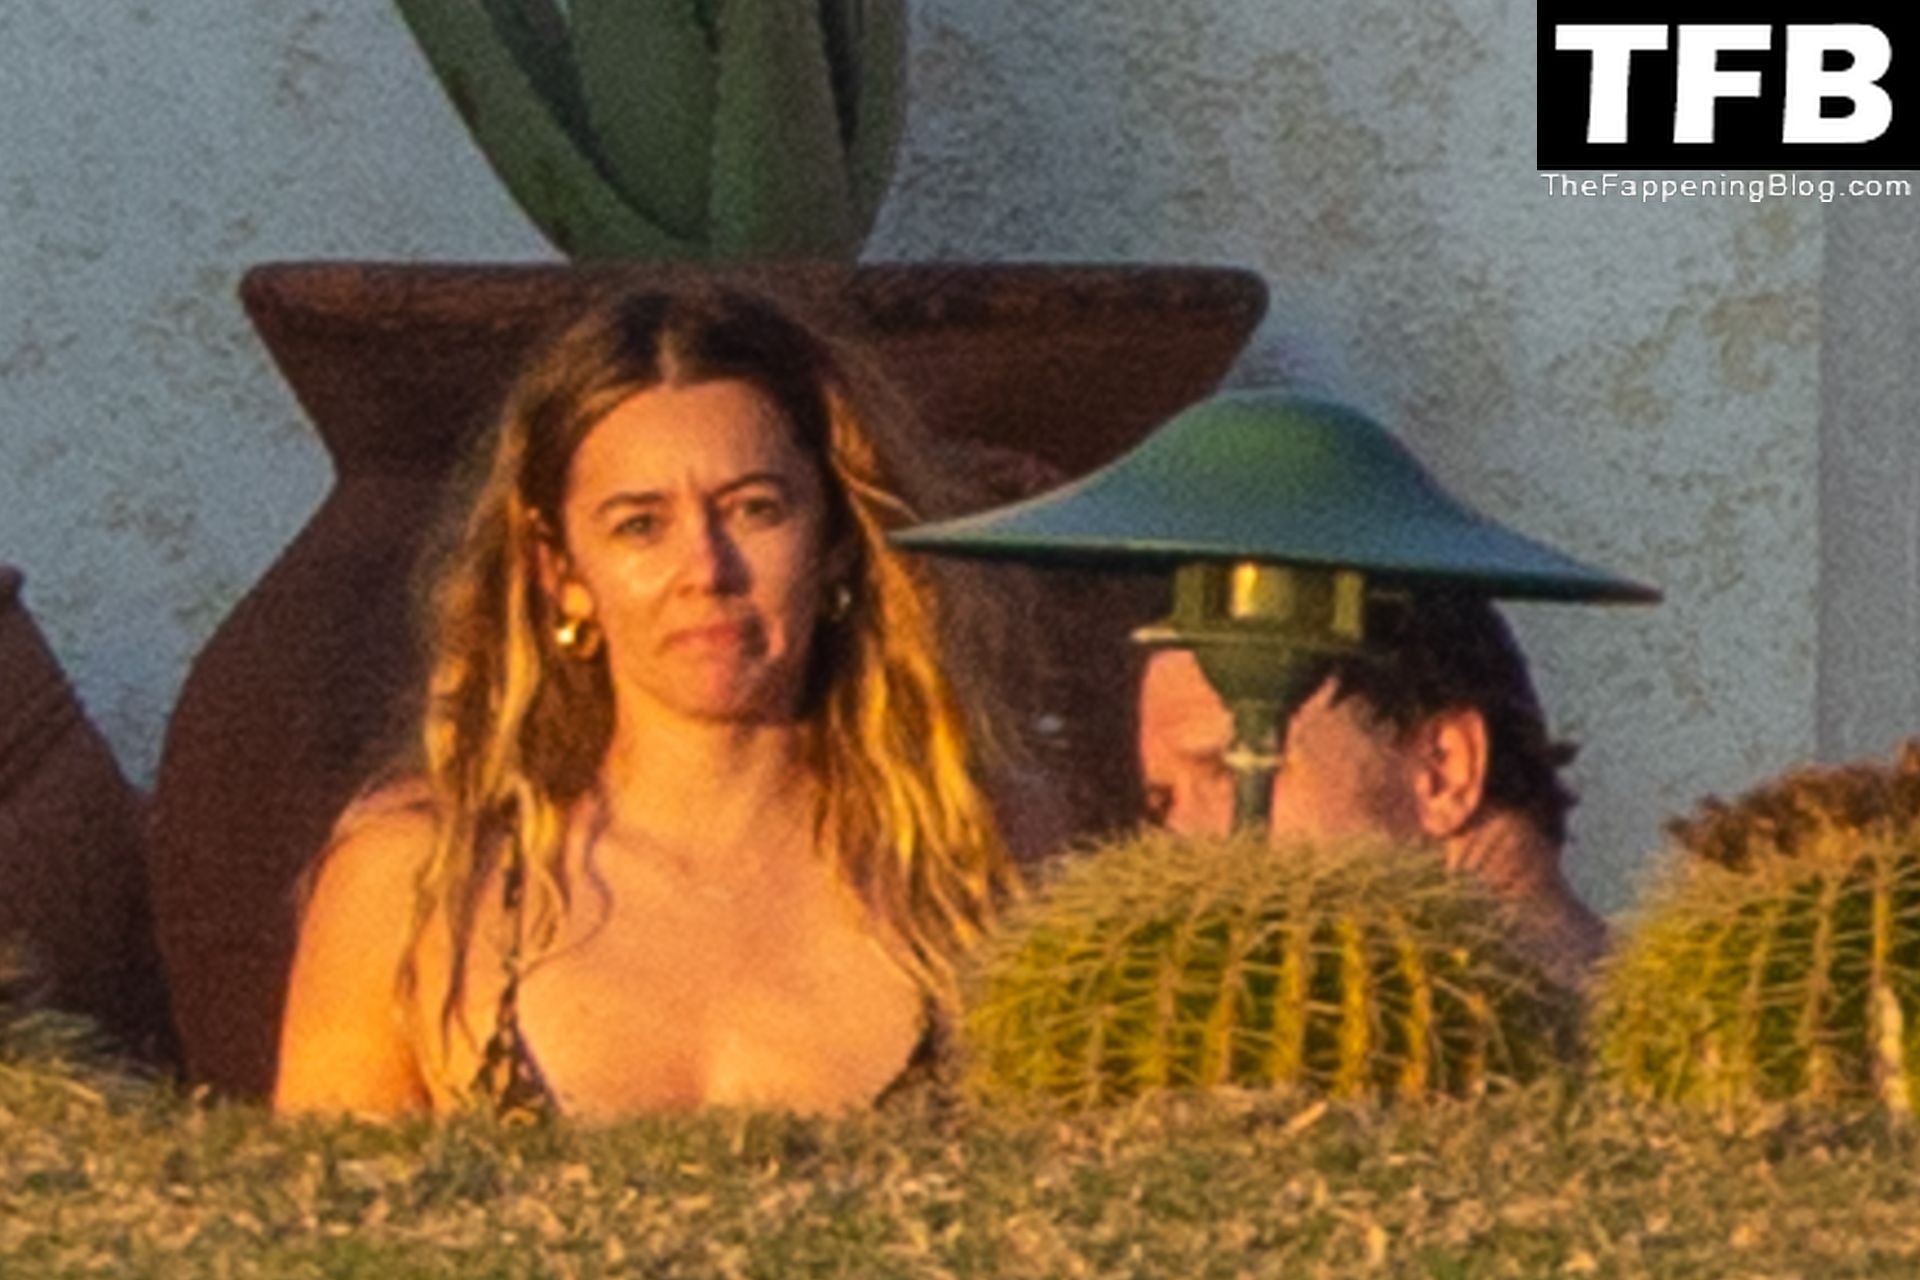 Jason-Sudeikis-and-Keeley-Hazell-have-rekindled-their-romance-as-they-were-spotted-packing-on-the-PDA-during-a-recent-trip-to-Cabo-San-Lucas-Mexico-TFB-11.jpg